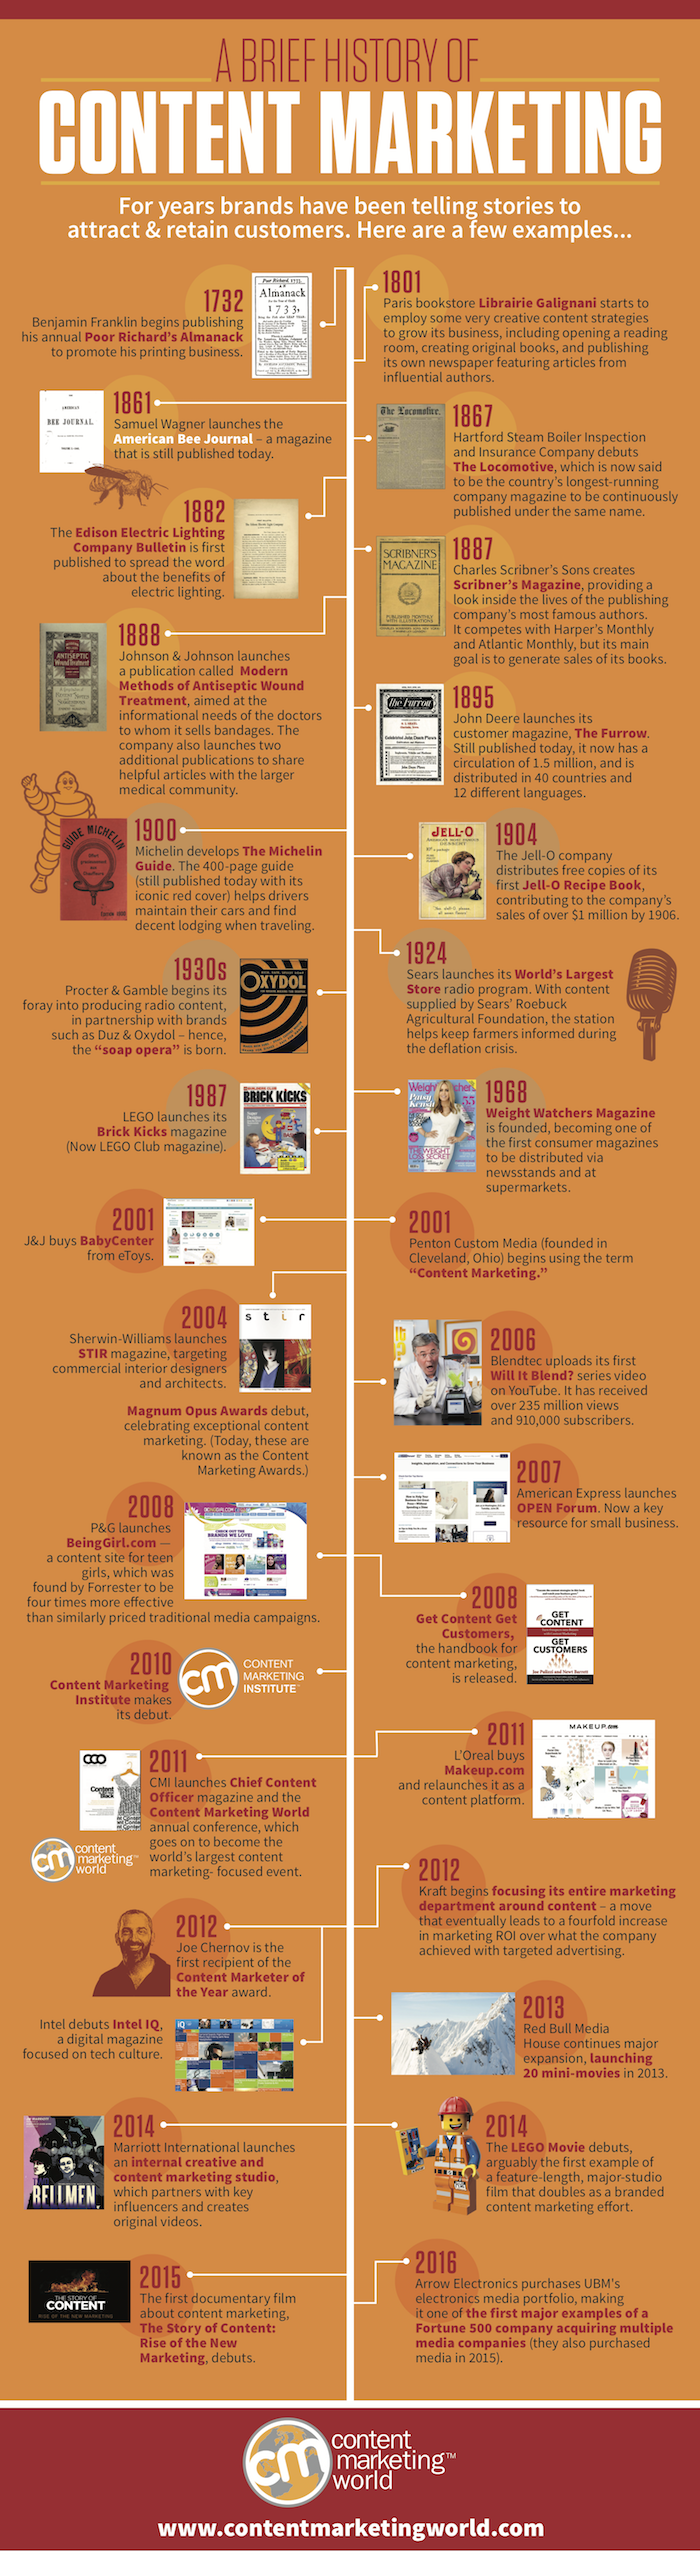 History-of-Content-Marketing